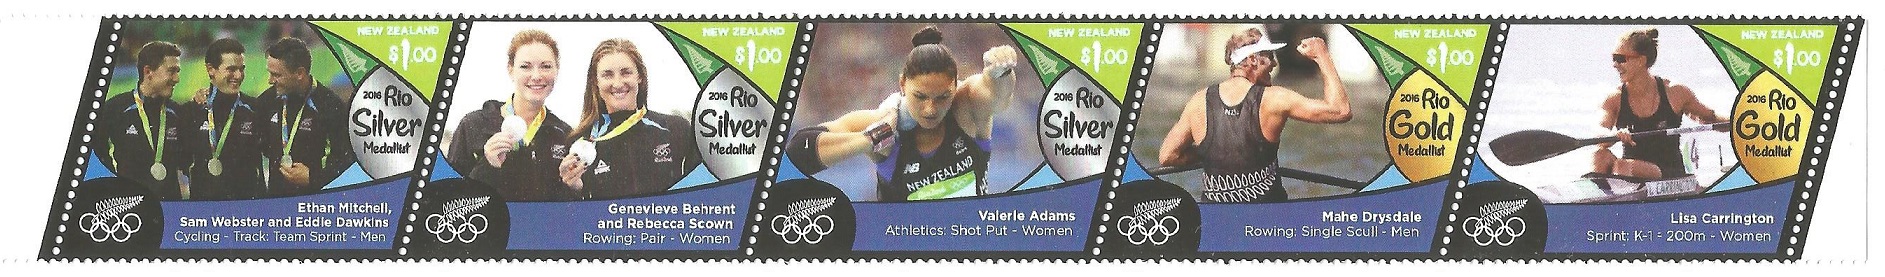 Stamp NZL 2016 OG Rio de Janeiro strip of five se tenant medal winner stamps with medal winners with including W2 and M1X. jpg